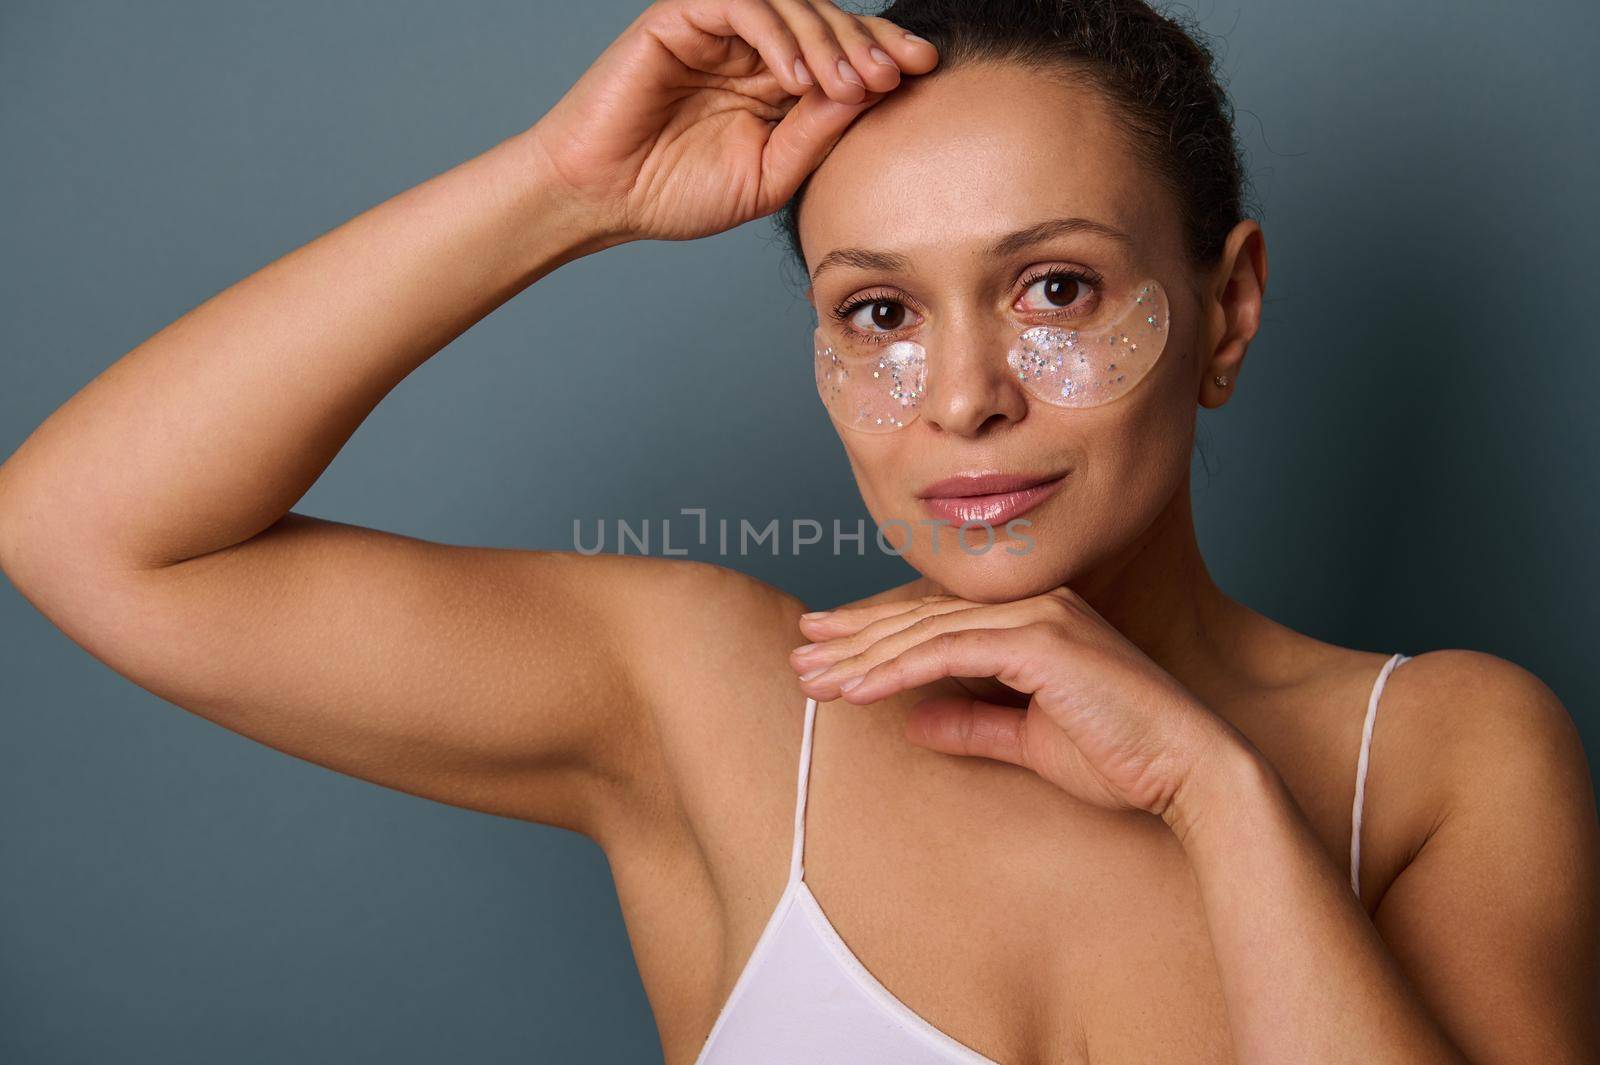 Attractive woman with anti-fatigue under-eye mask looking at camera posing against gray background. Skin care, hydrogel collagen patches, fabric mask under eyes to reduce eye bags and puffiness by artgf